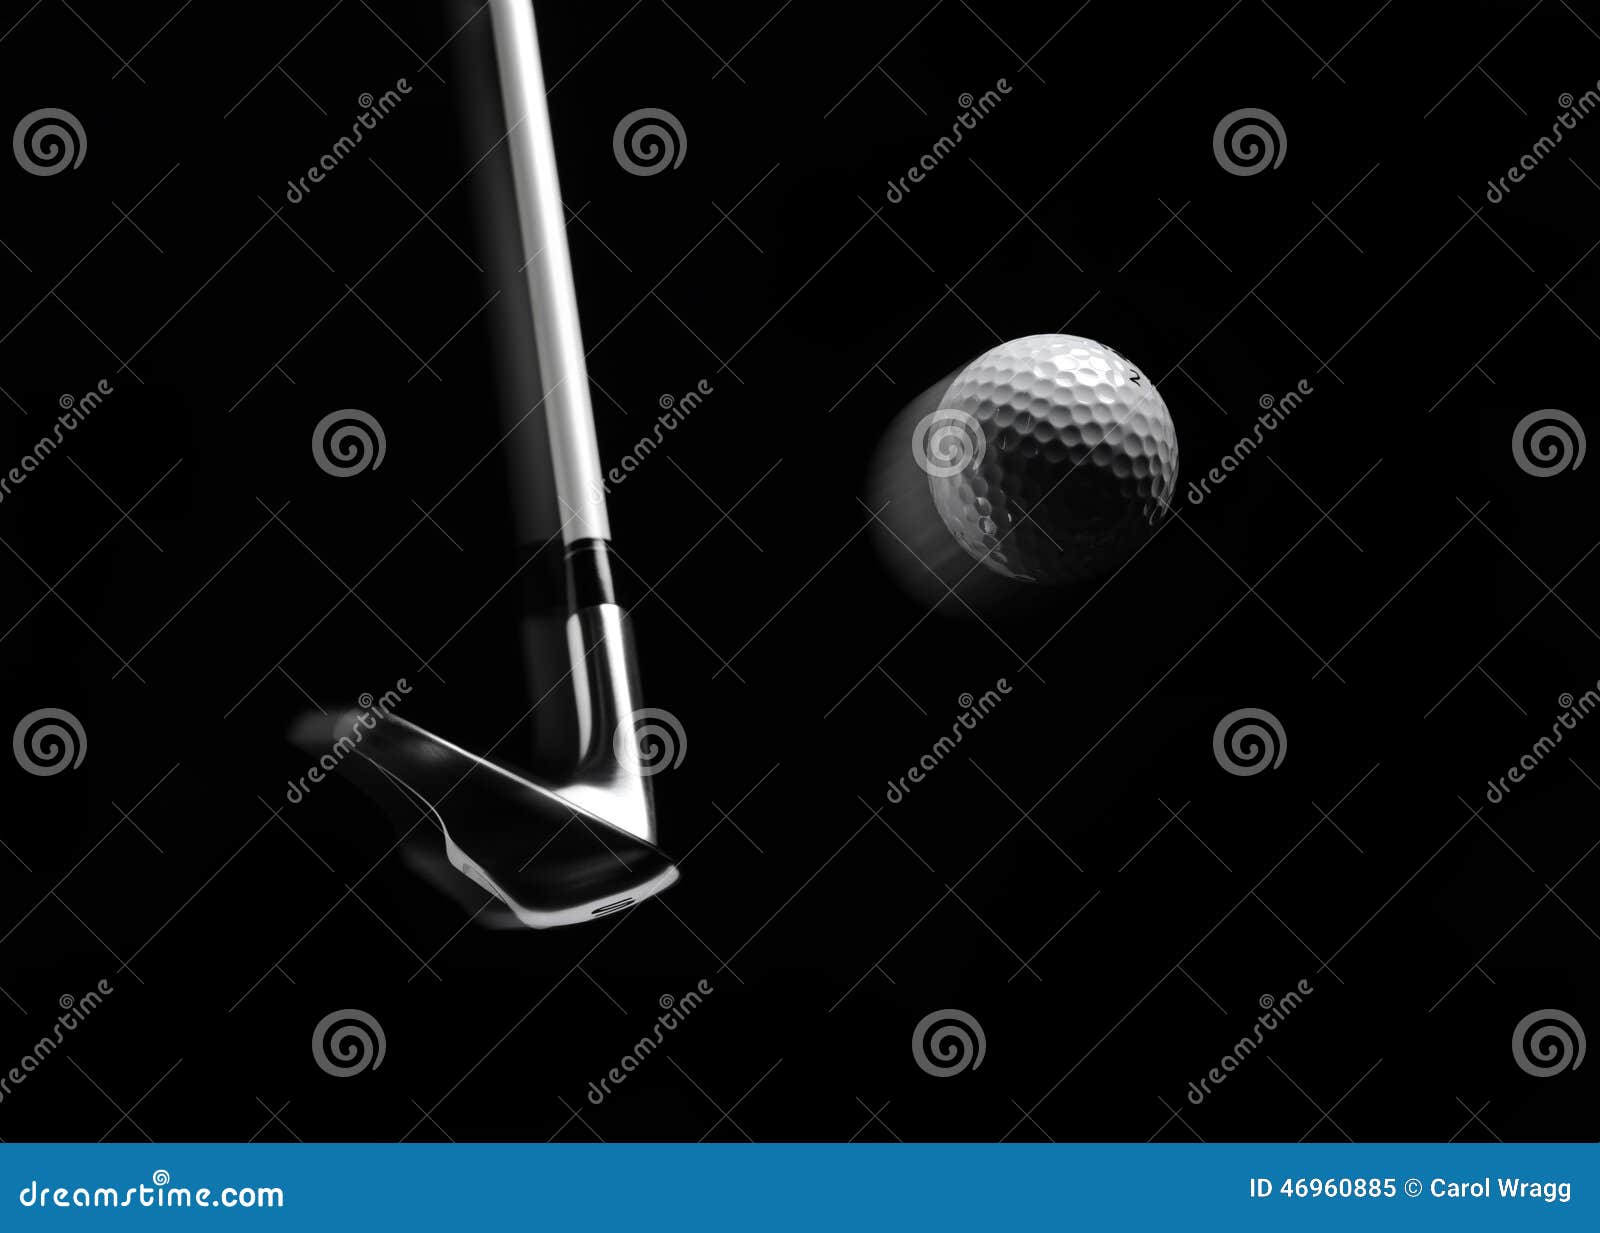 Golf Club Hitting a Golf Ball with Movement Stock Image - Image of ...